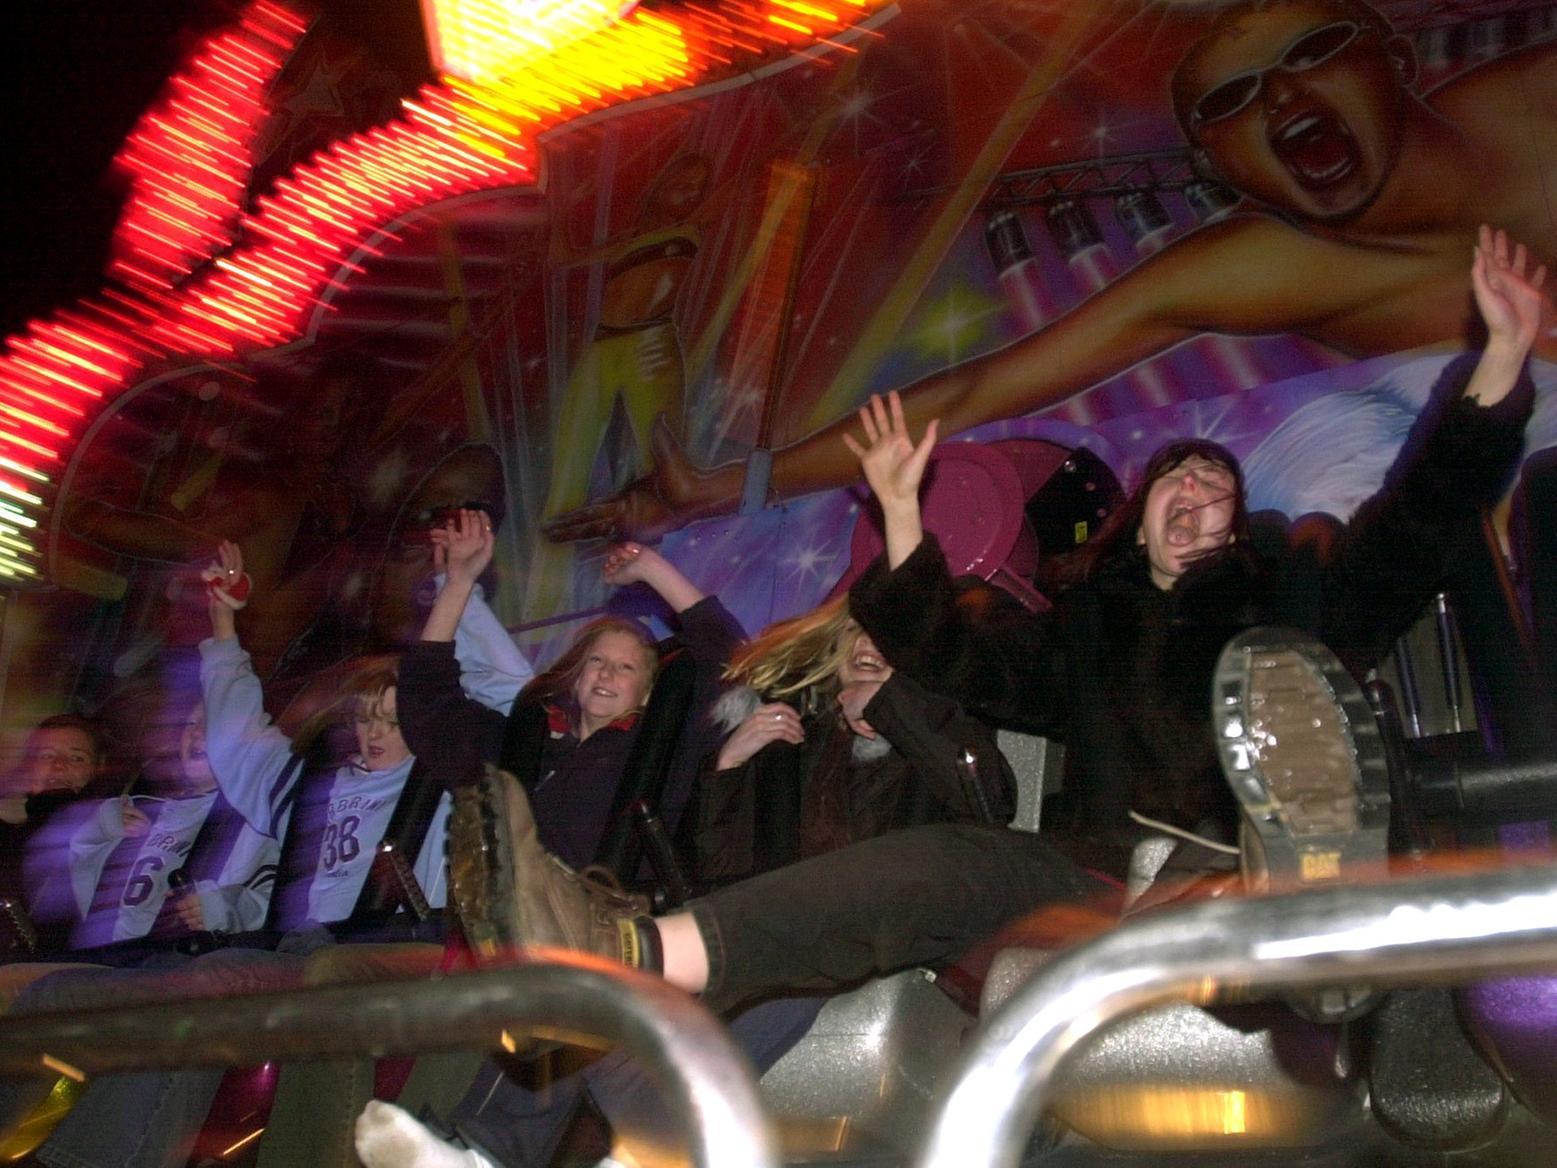 Revellers enjoy themselves on the 'Disco Fever' ride on New Year's Eve in the city centre.